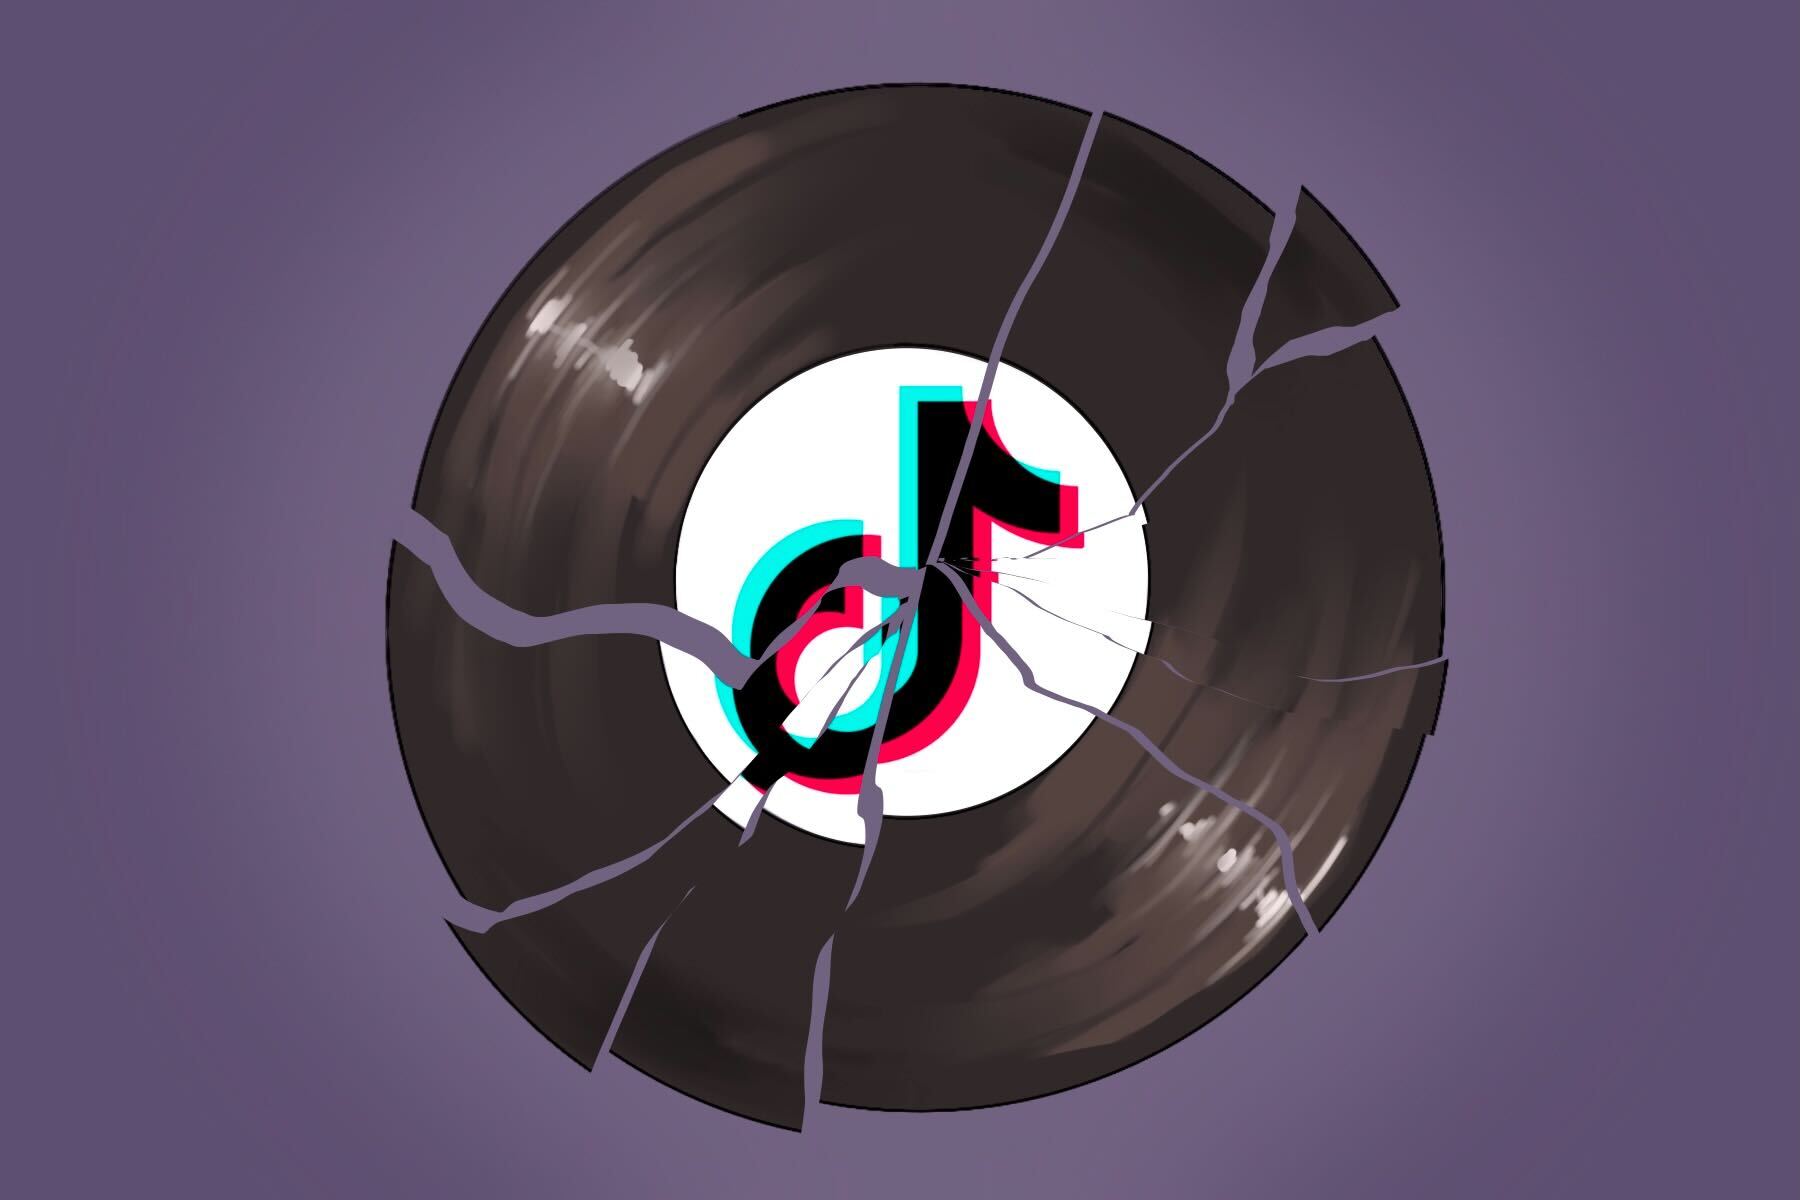 An image of TikTok on a record